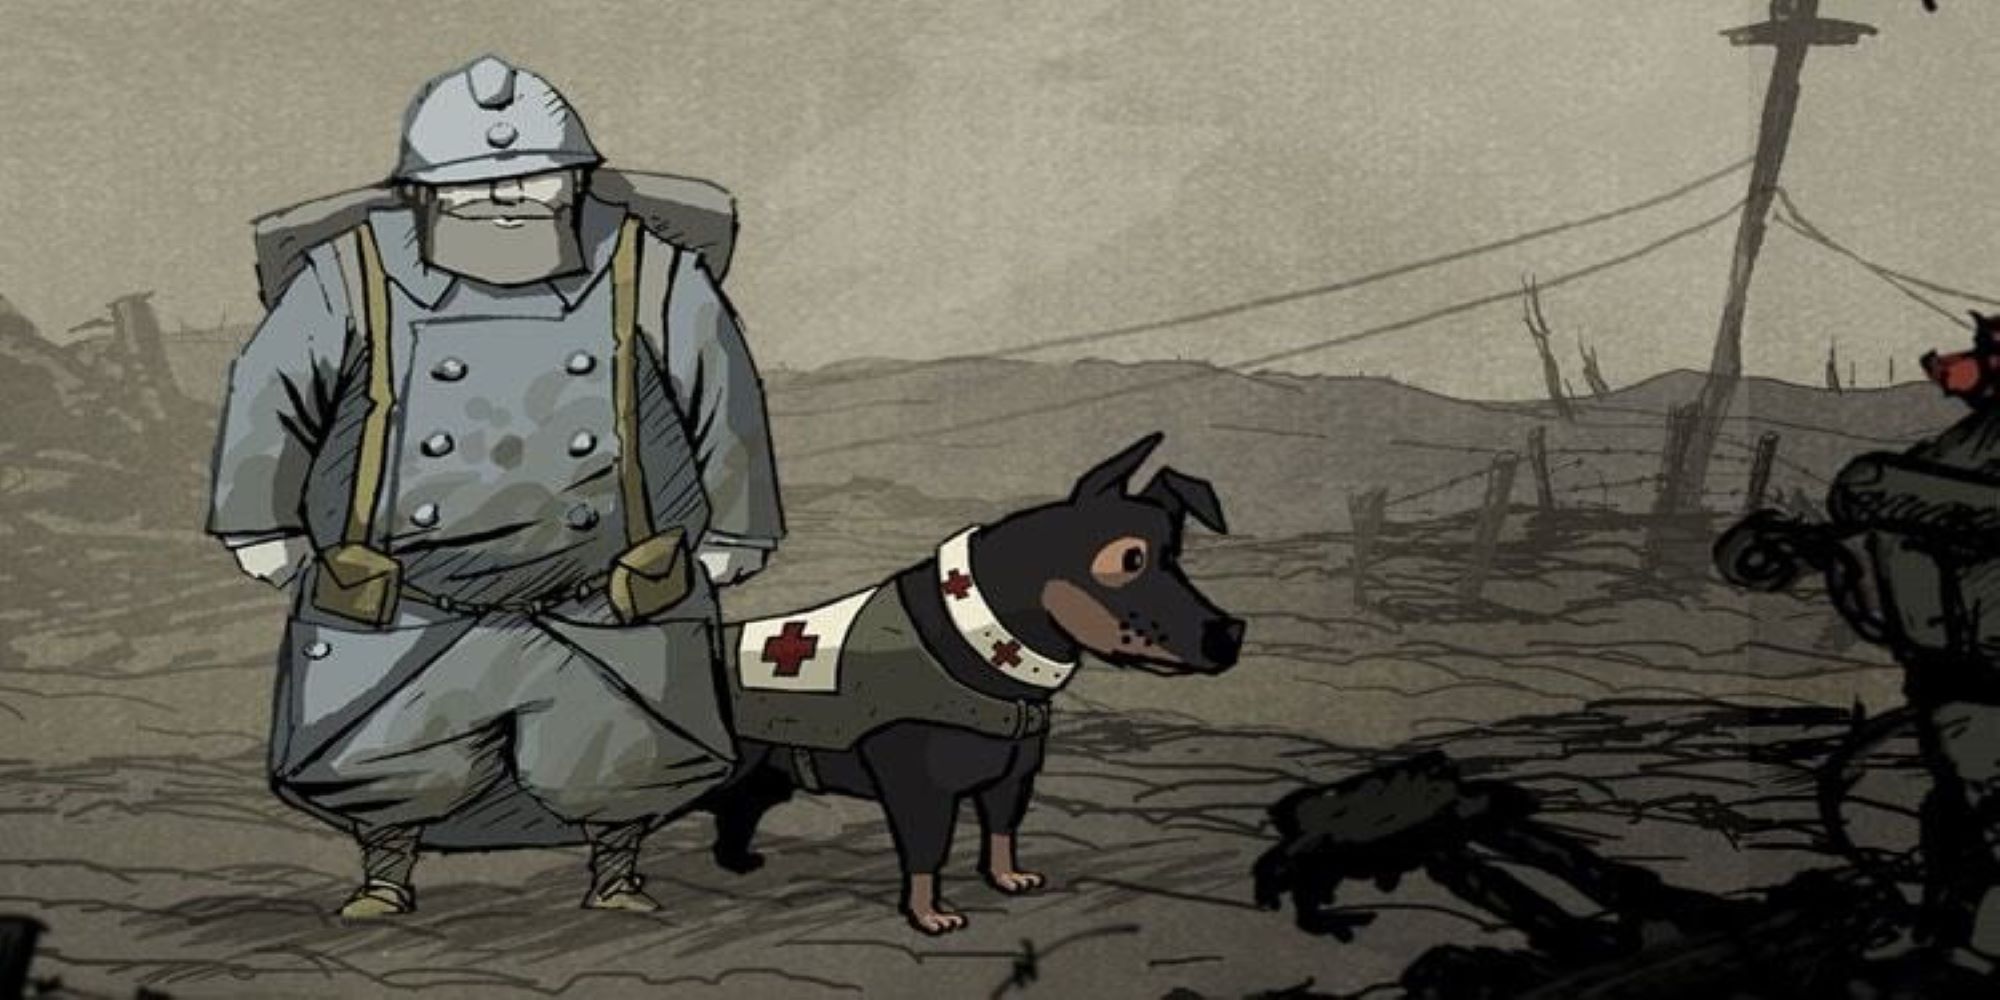 soldier and medic dog standing in rubble 